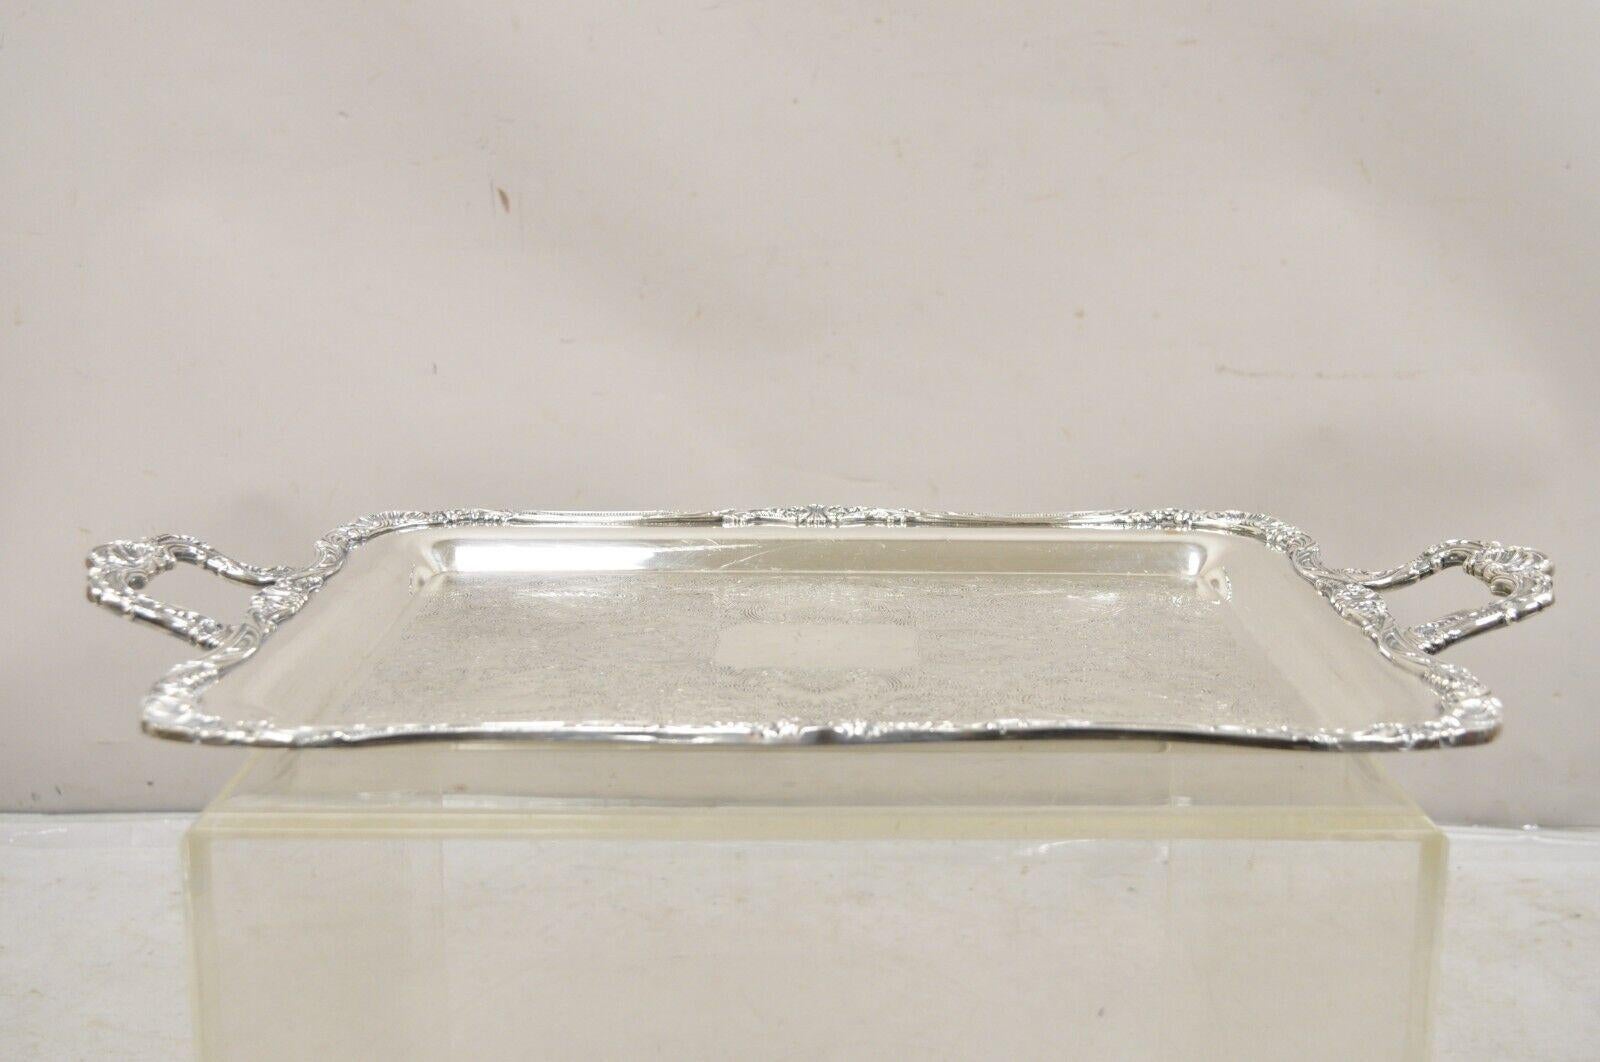 Vintage WM Rogers 290 Silver Plated Ornate Victorian Style Serving Platter Tray For Sale 4